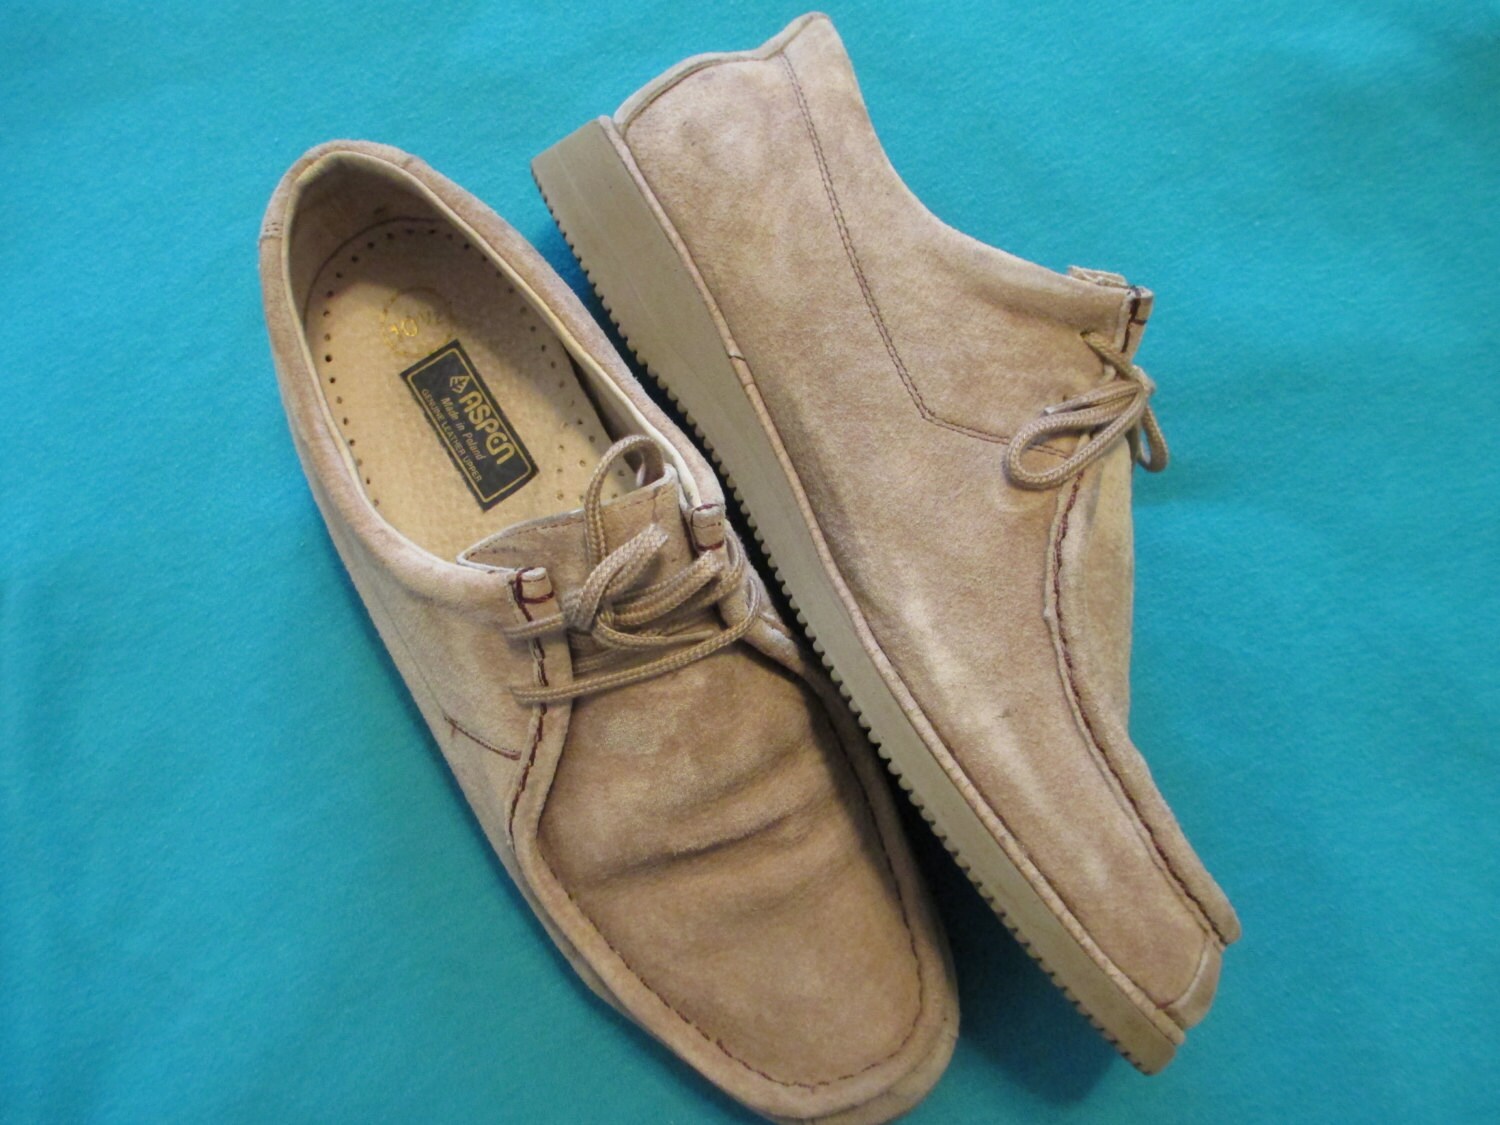 Aspen tan suede shoes made in Poland size 10 1/2 D SALE